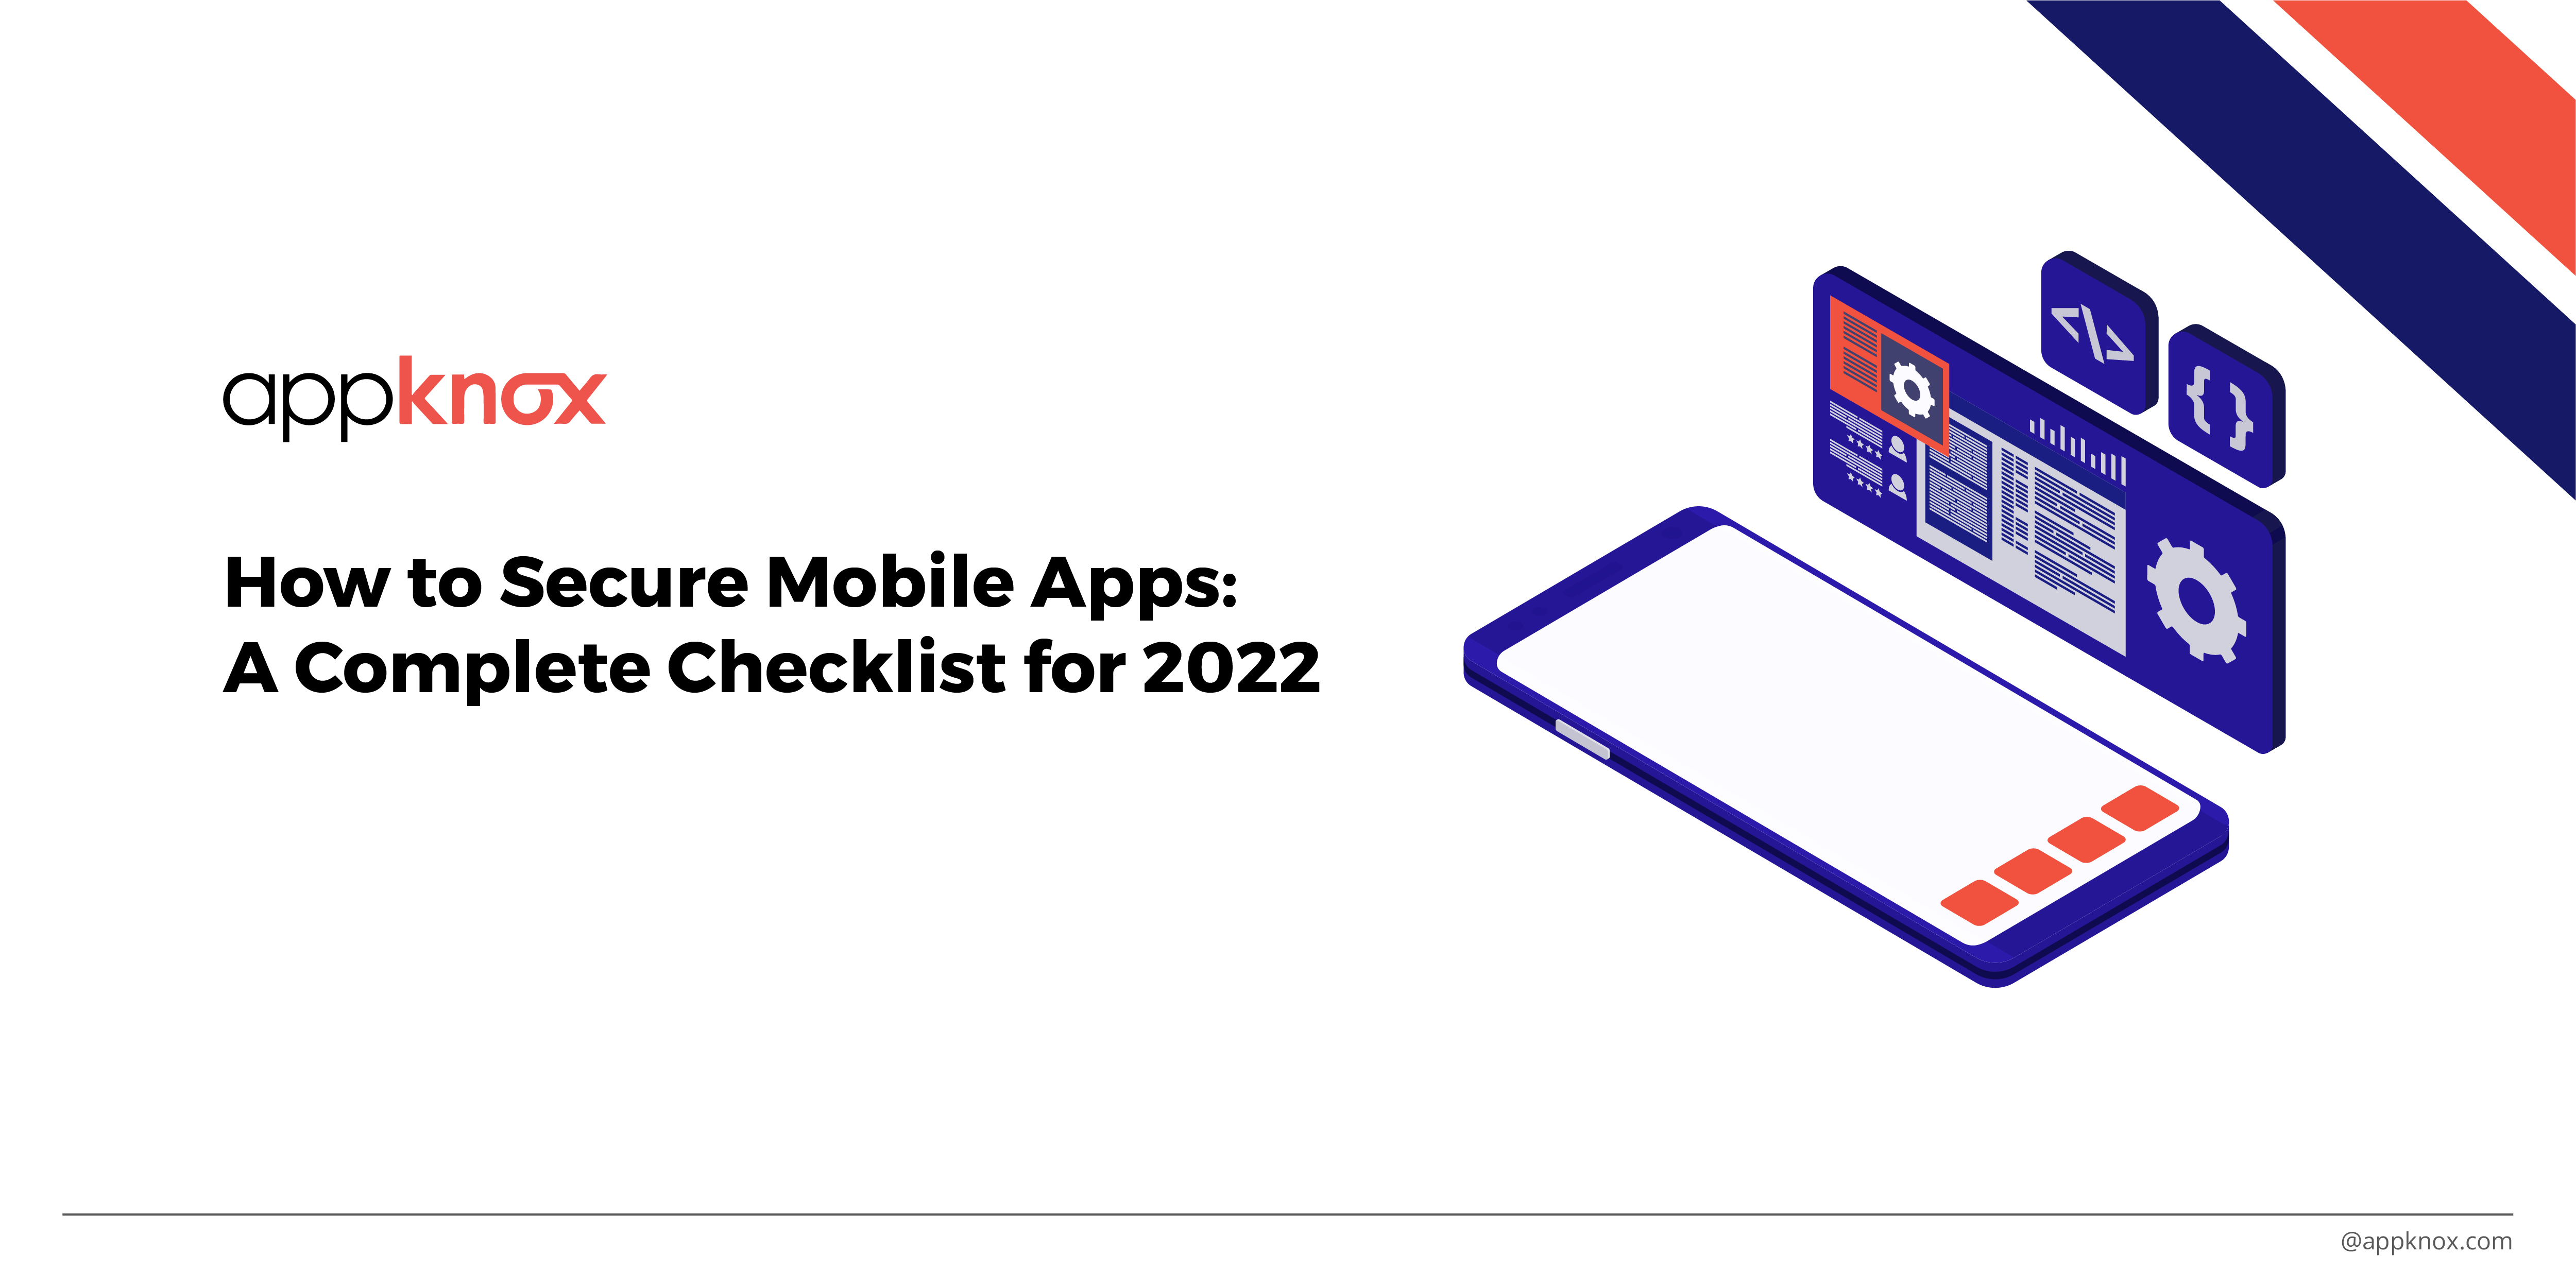 Mobile App Security Checklist 2022 - How to Secure Mobile Apps?